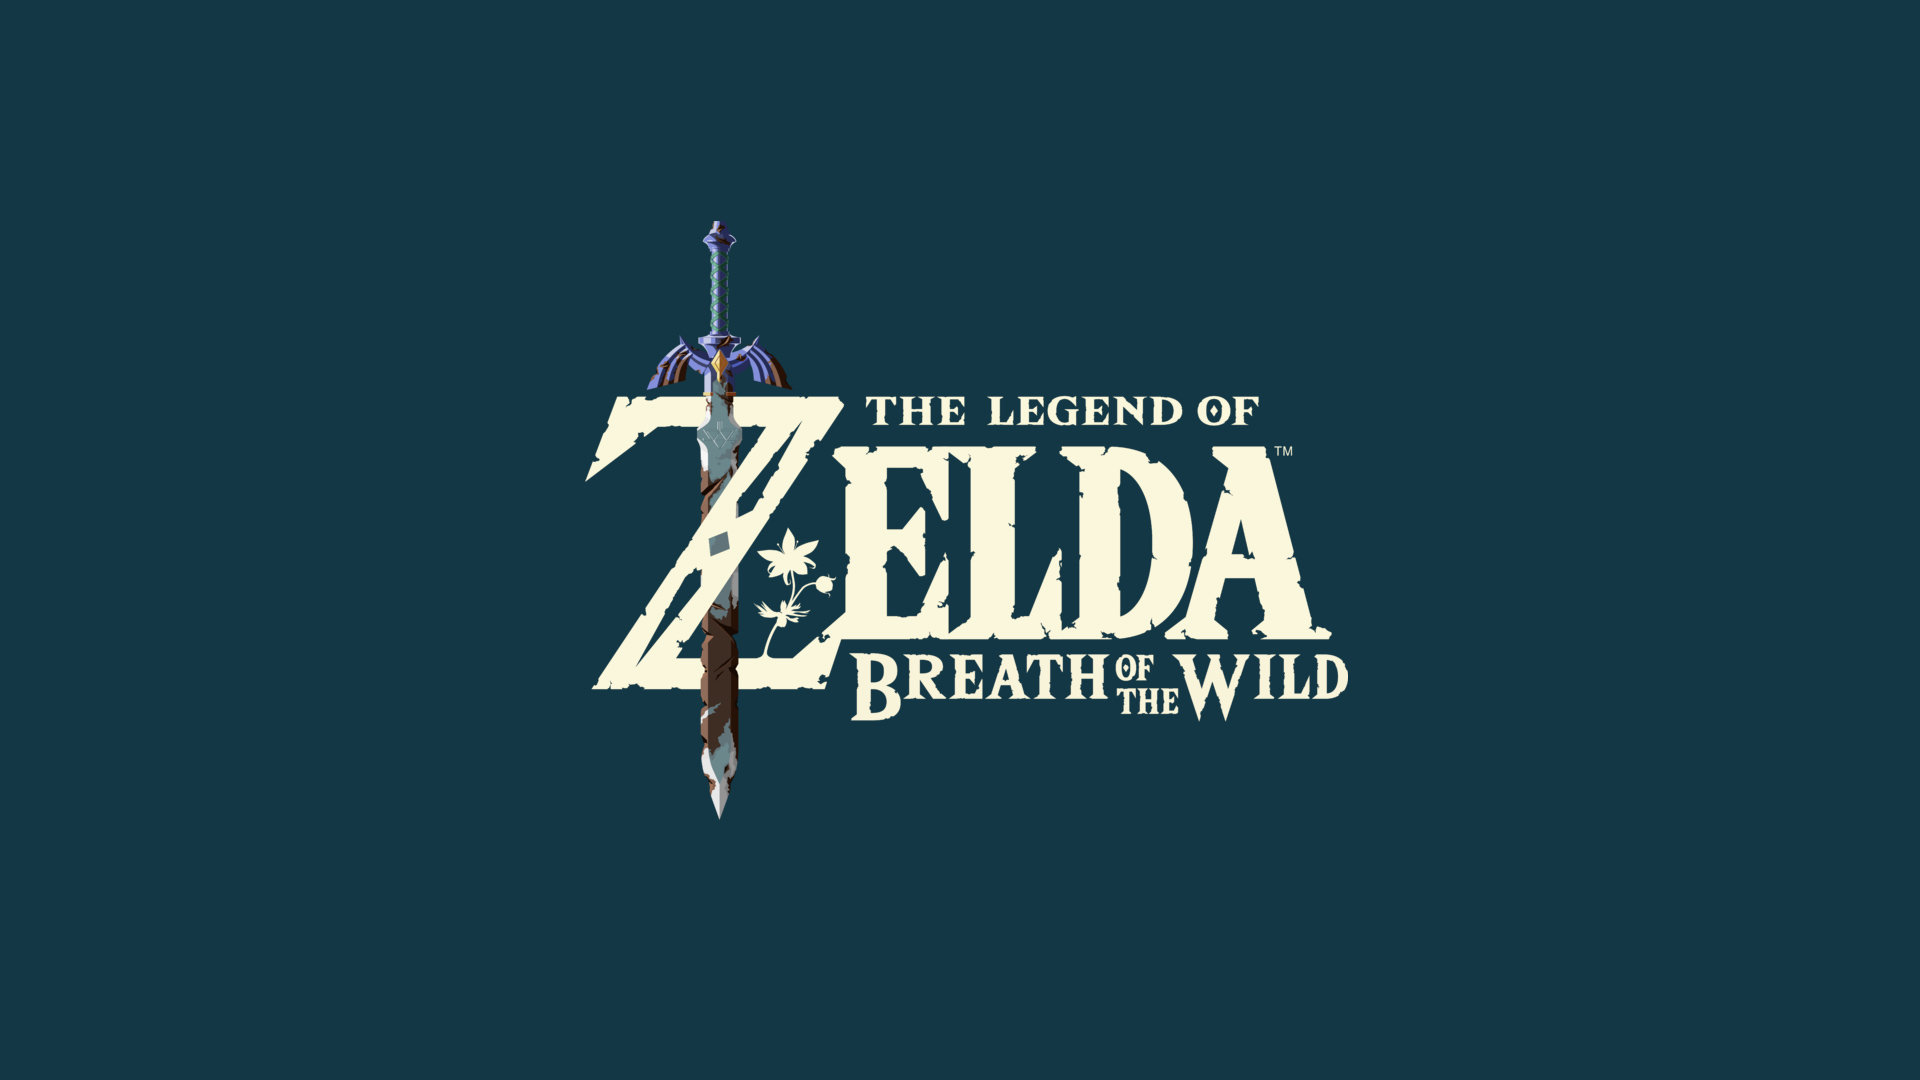 Download full hd 1080p The Legend Of Zelda: Breath Of The Wild desktop background ID:111502 for free